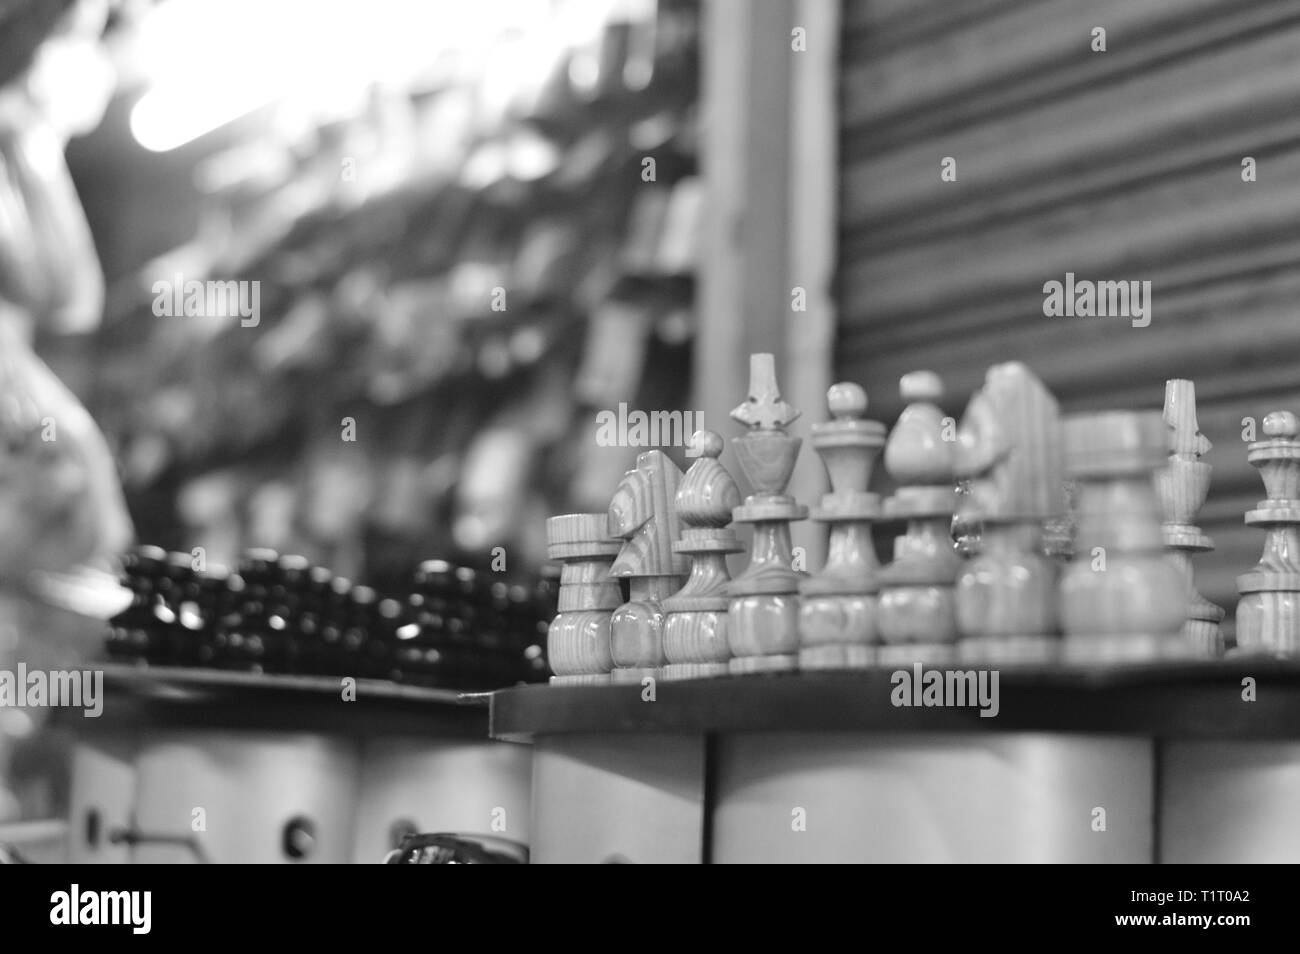 Black and white chess pieces in a market Stock Photo